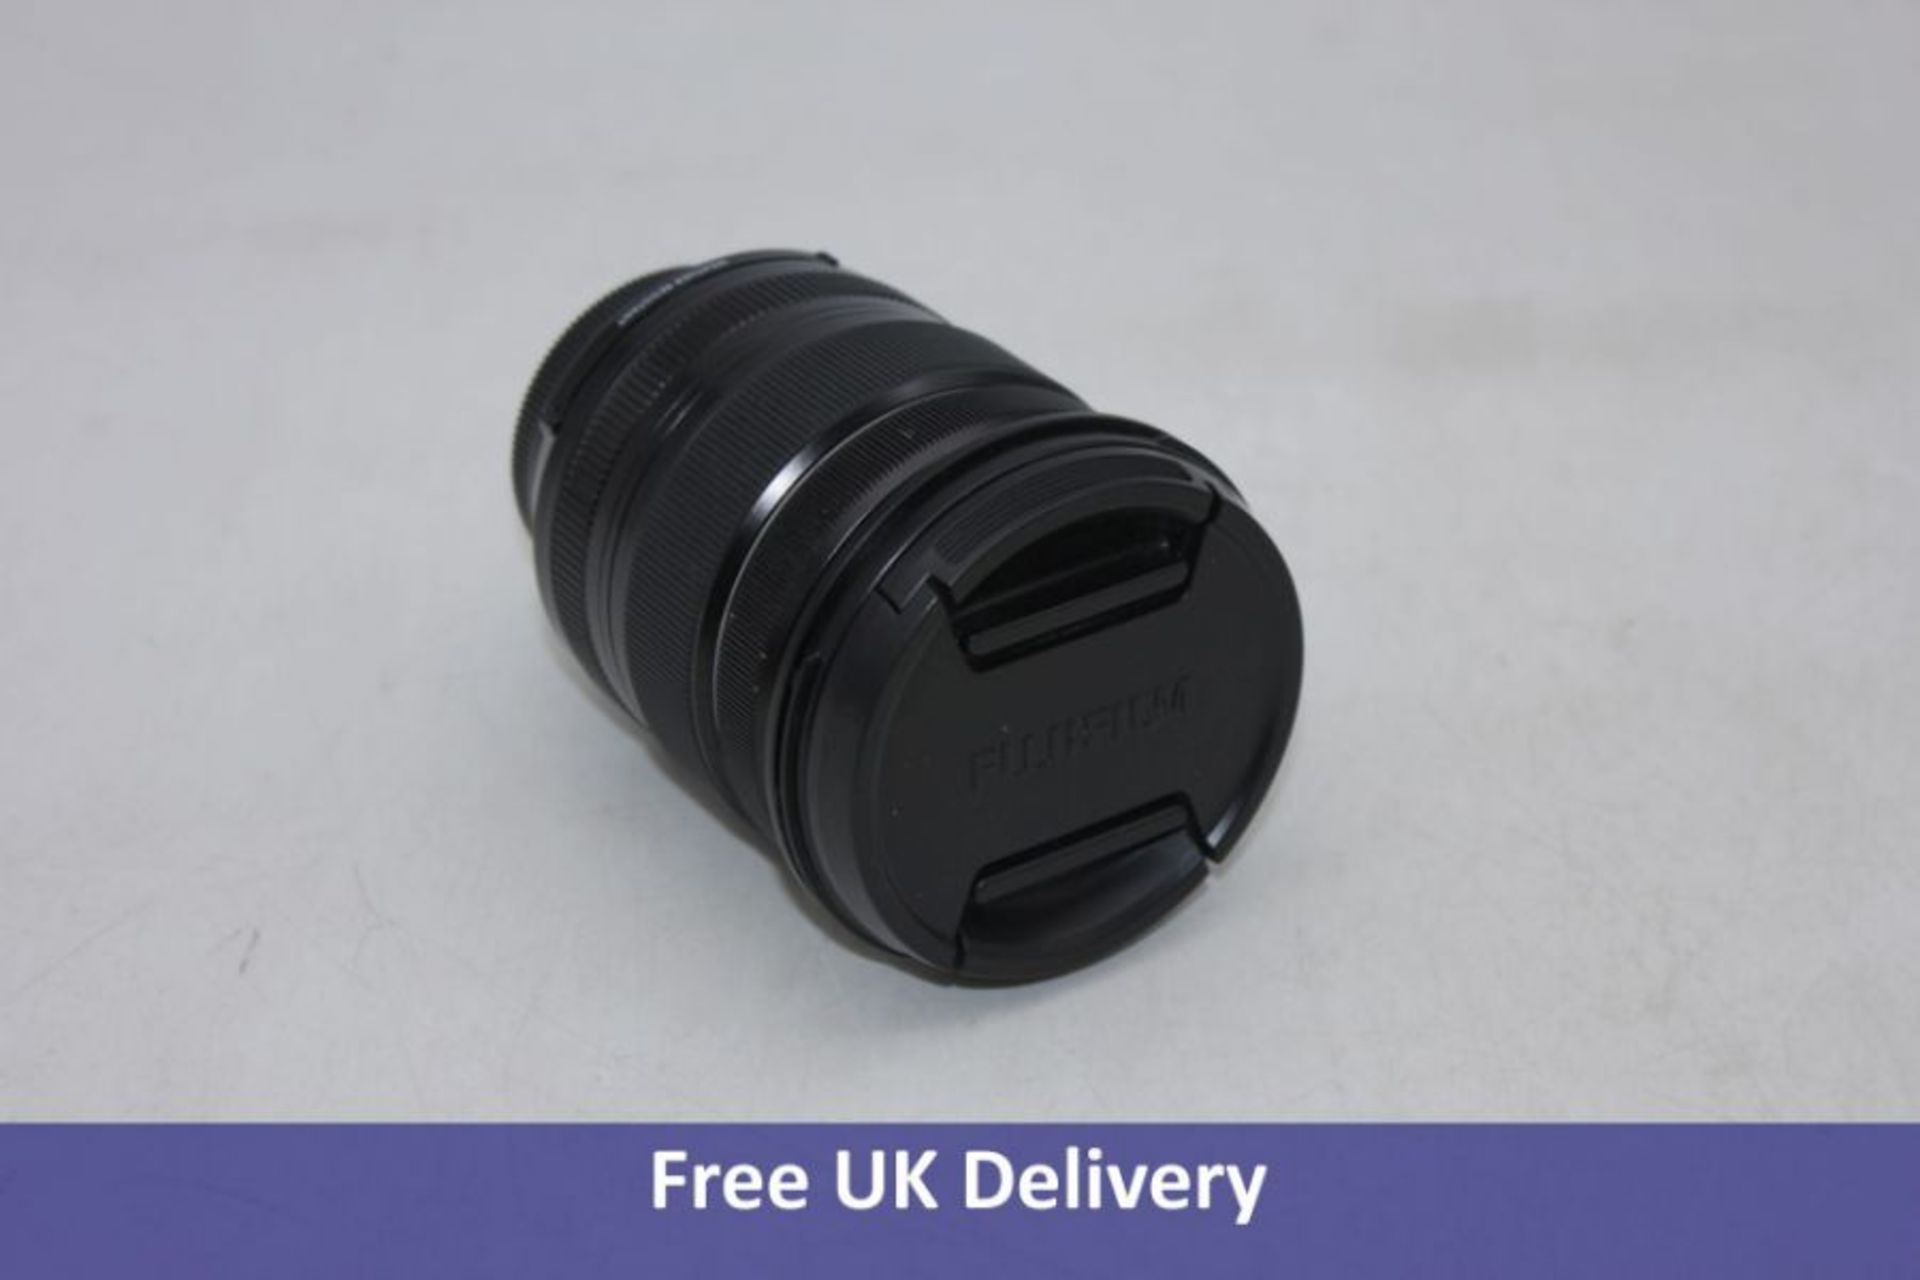 Fujinon XF16-80mmF4 R OIS WR Camera Lens. No box, marked Faulty, Water Damage